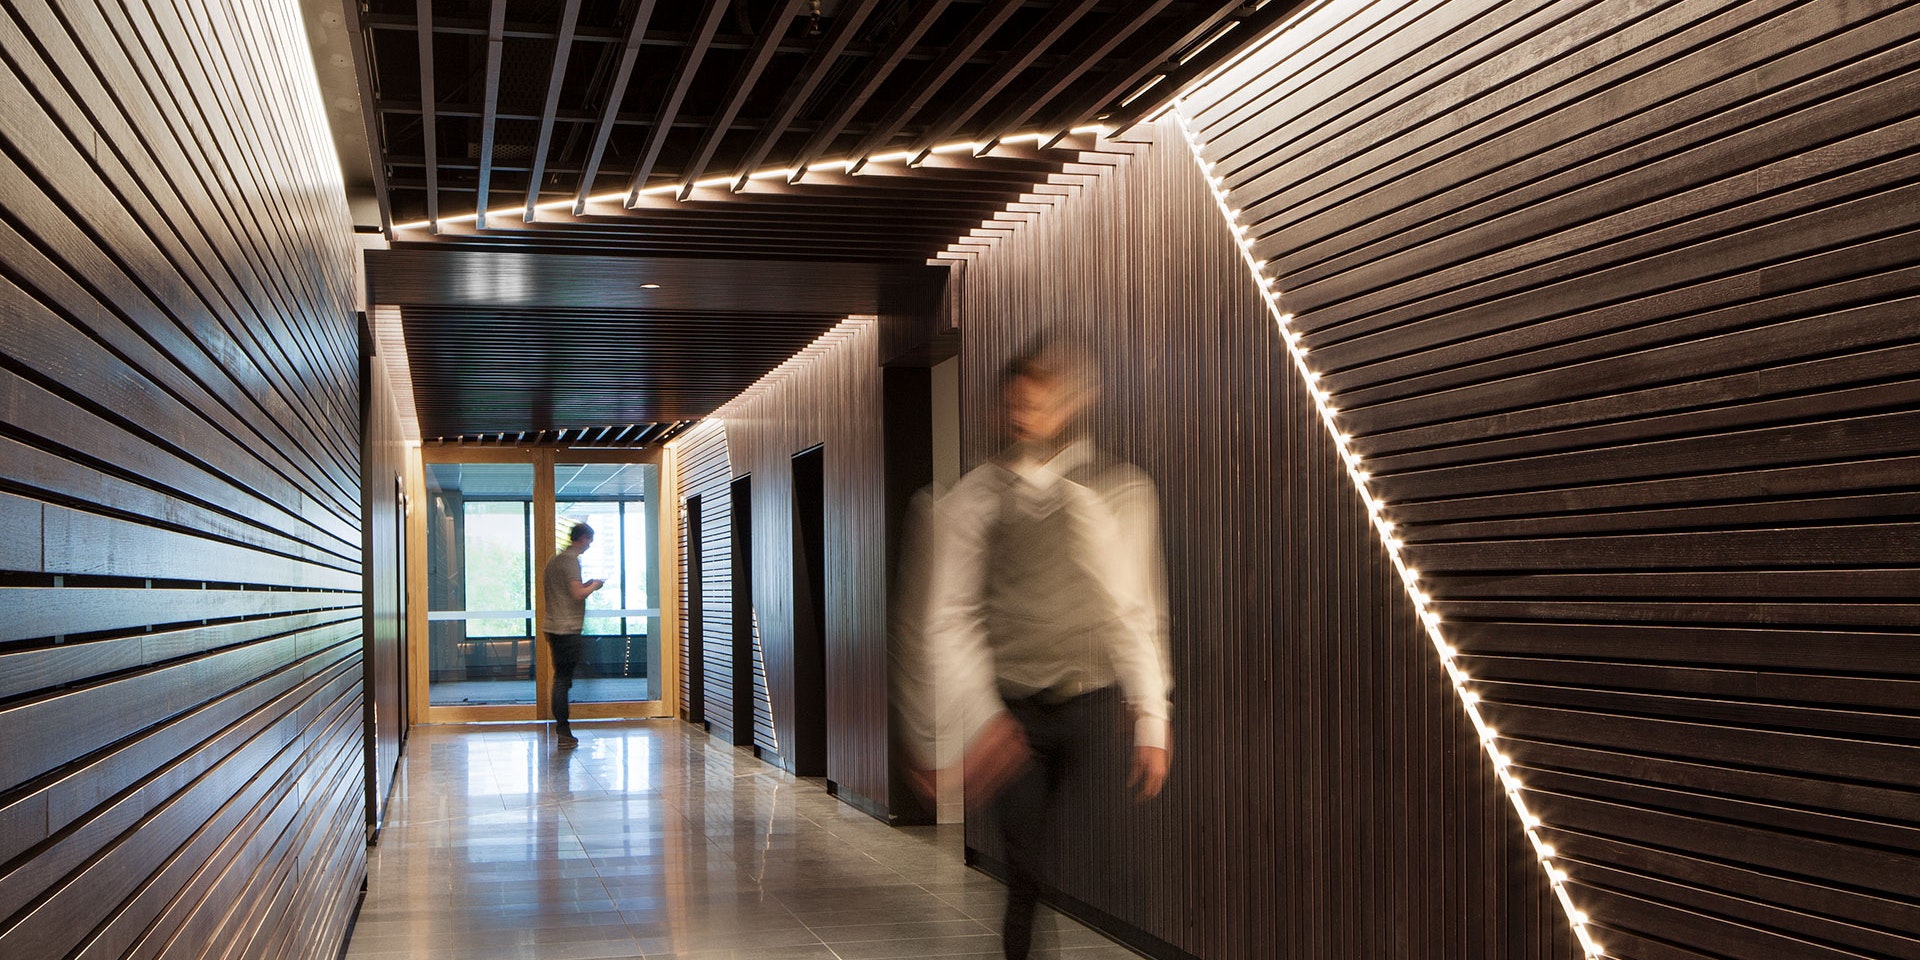 Aris LED linear floodlight in application, installed in 530 Collins Street Lobby. Architectural LED lighting.